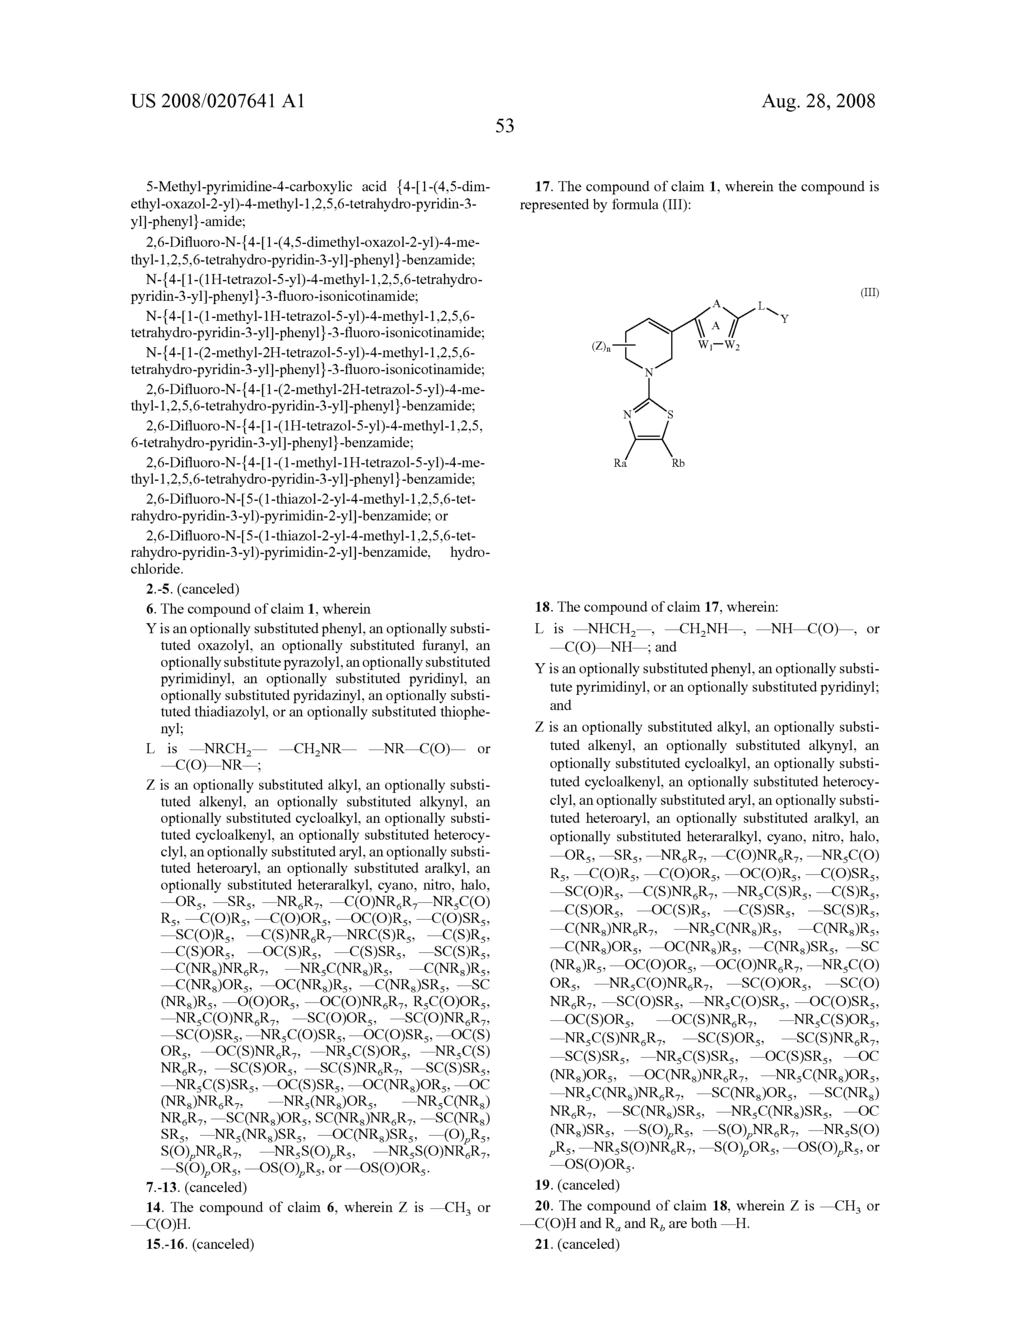 CYCLOHEXENYL-ARYL COMPOUNDS FOR INFLAMMATION AND IMMUNE-RELATED USES - diagram, schematic, and image 54